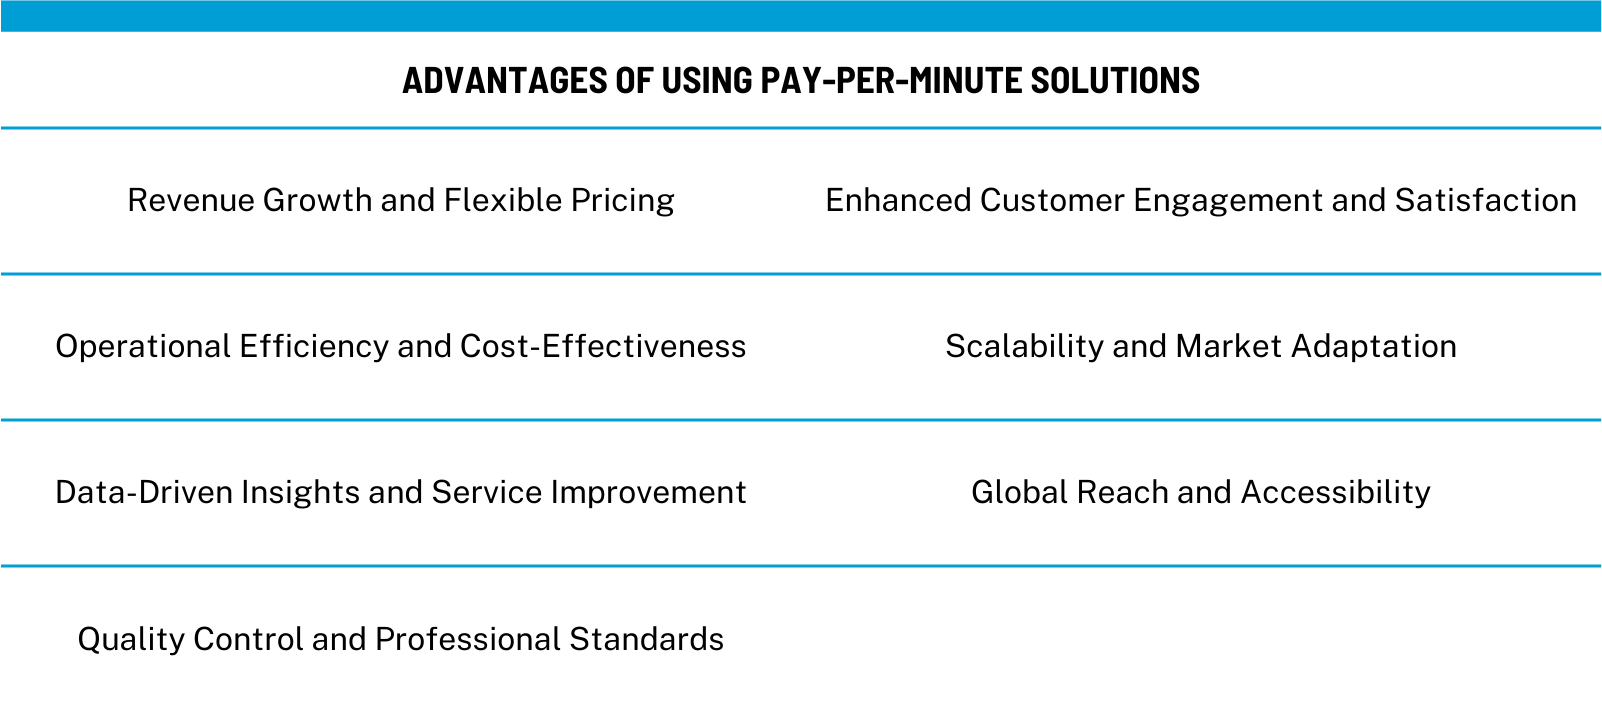 Infographic listing the strategic advantages for businesses using pay-per-minute solutions, including revenue growth, customer satisfaction, operational efficiency, scalability, data insights, global reach, and quality control